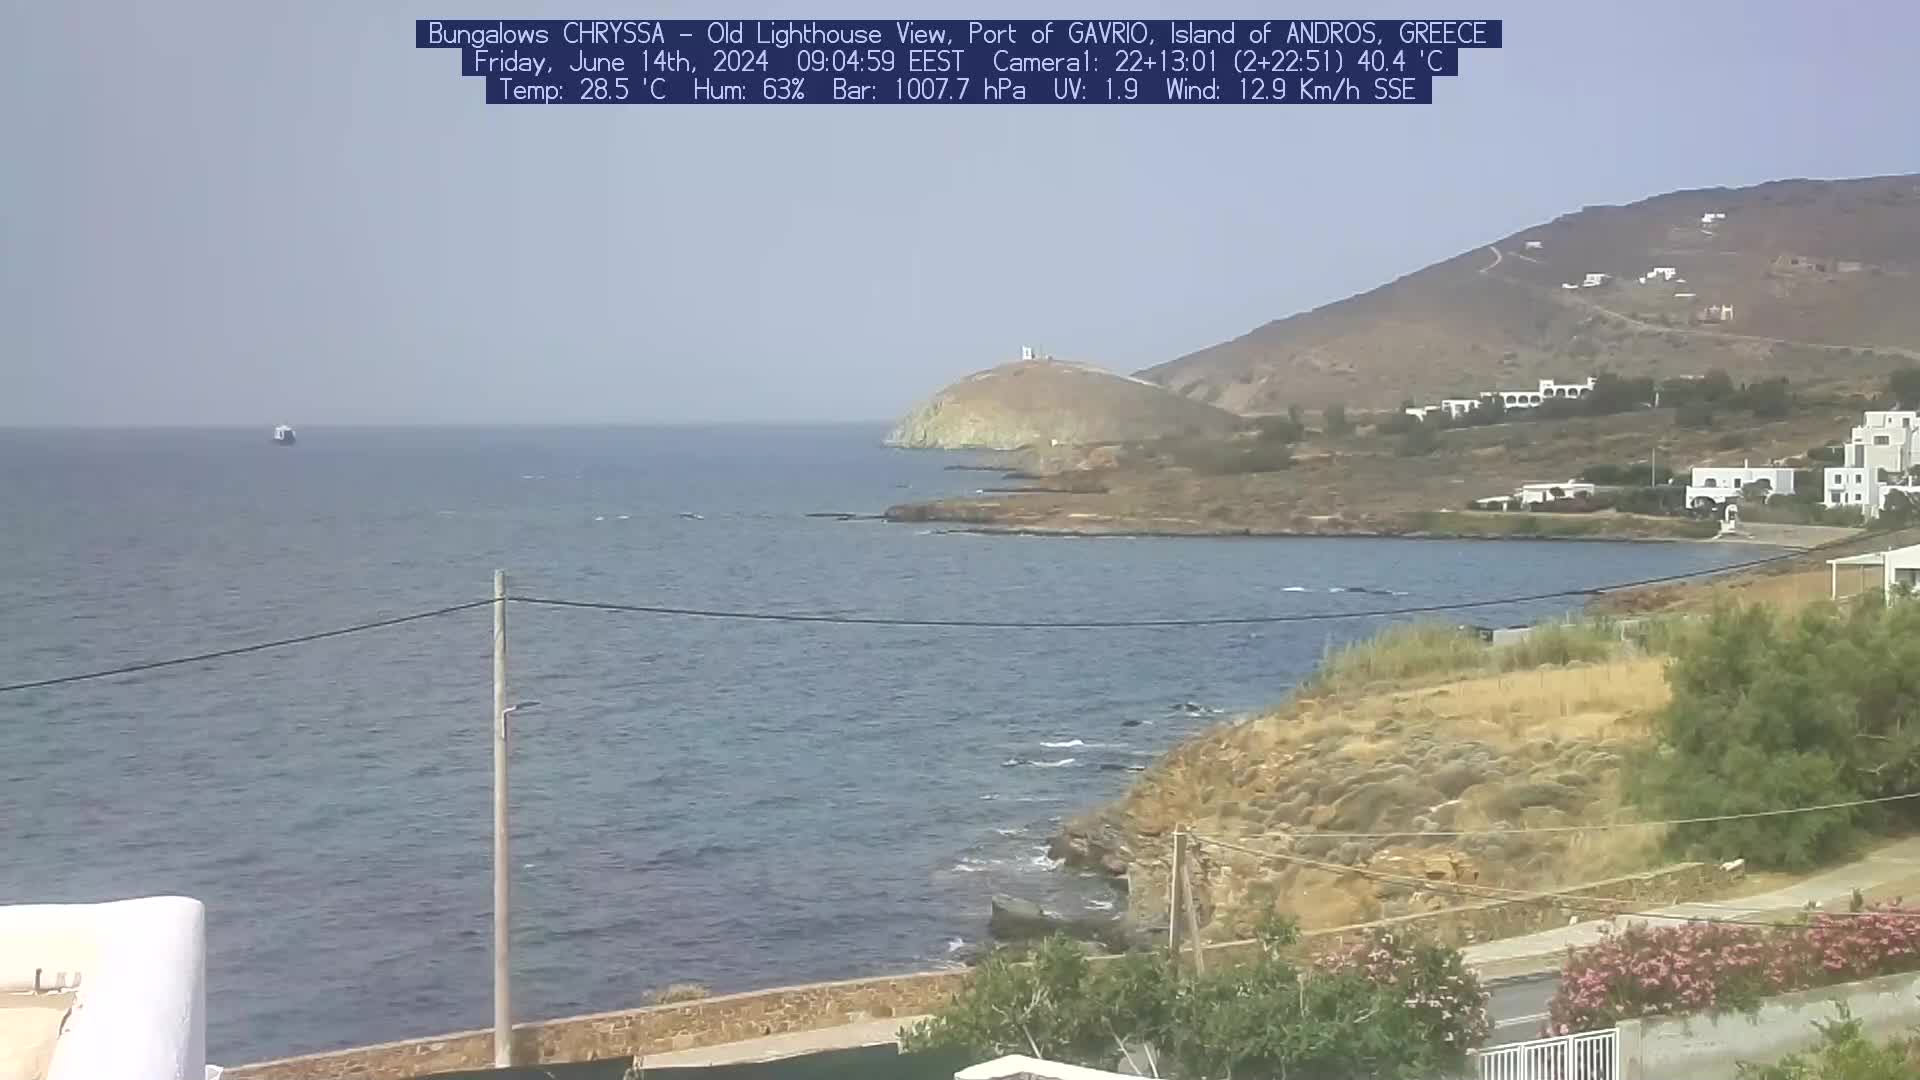 Andros - Gavrion Mar. 09:05